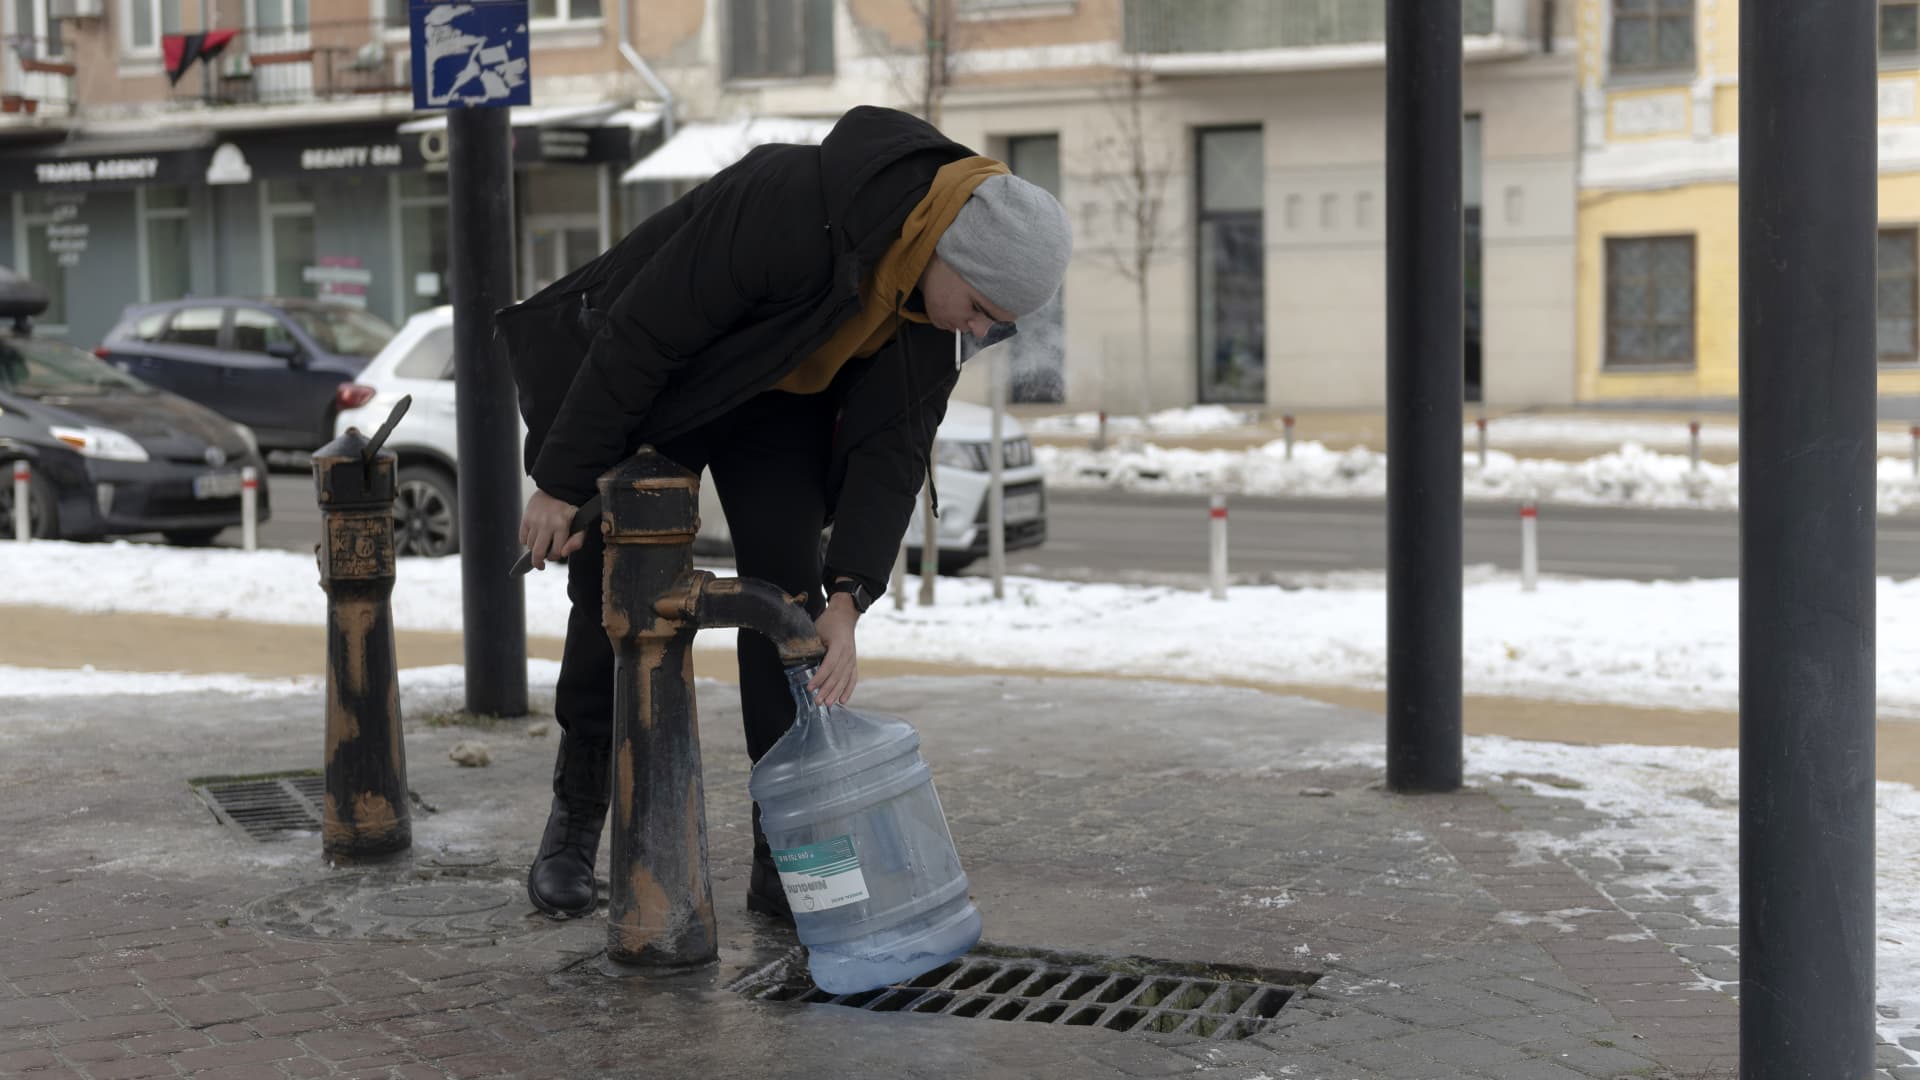 A resident collects water from a pump in Kyiv, Ukraine, on Tuesday, Dec. 6, 2022. Ukrainians have been no strangers to hardship over the past century, but their dogged resilience and solidarity in the face of Russian bombardment has been an enduring image of a war that started at the tail end of last winter. Photographer: Andrew Kravchenko/Bloomberg via Getty Images